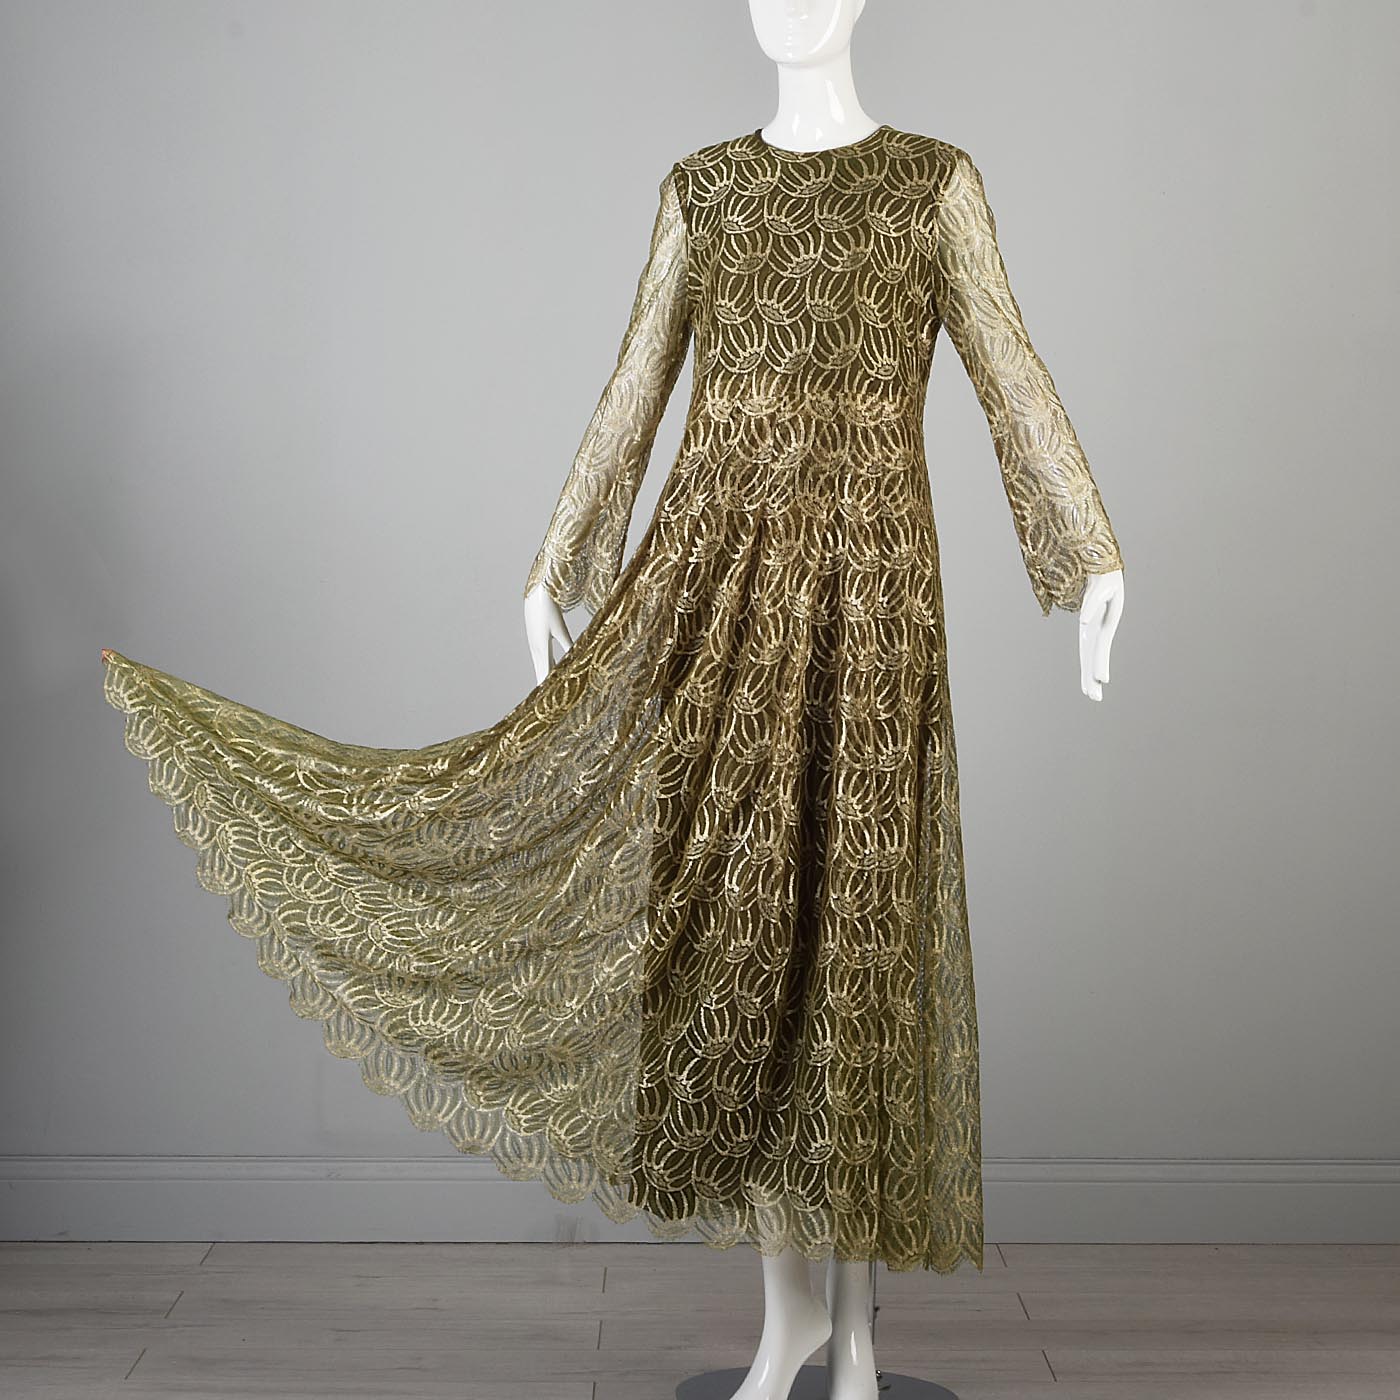 1960s Christian Dior Boutique Numbered Couture Gold Lace Gown